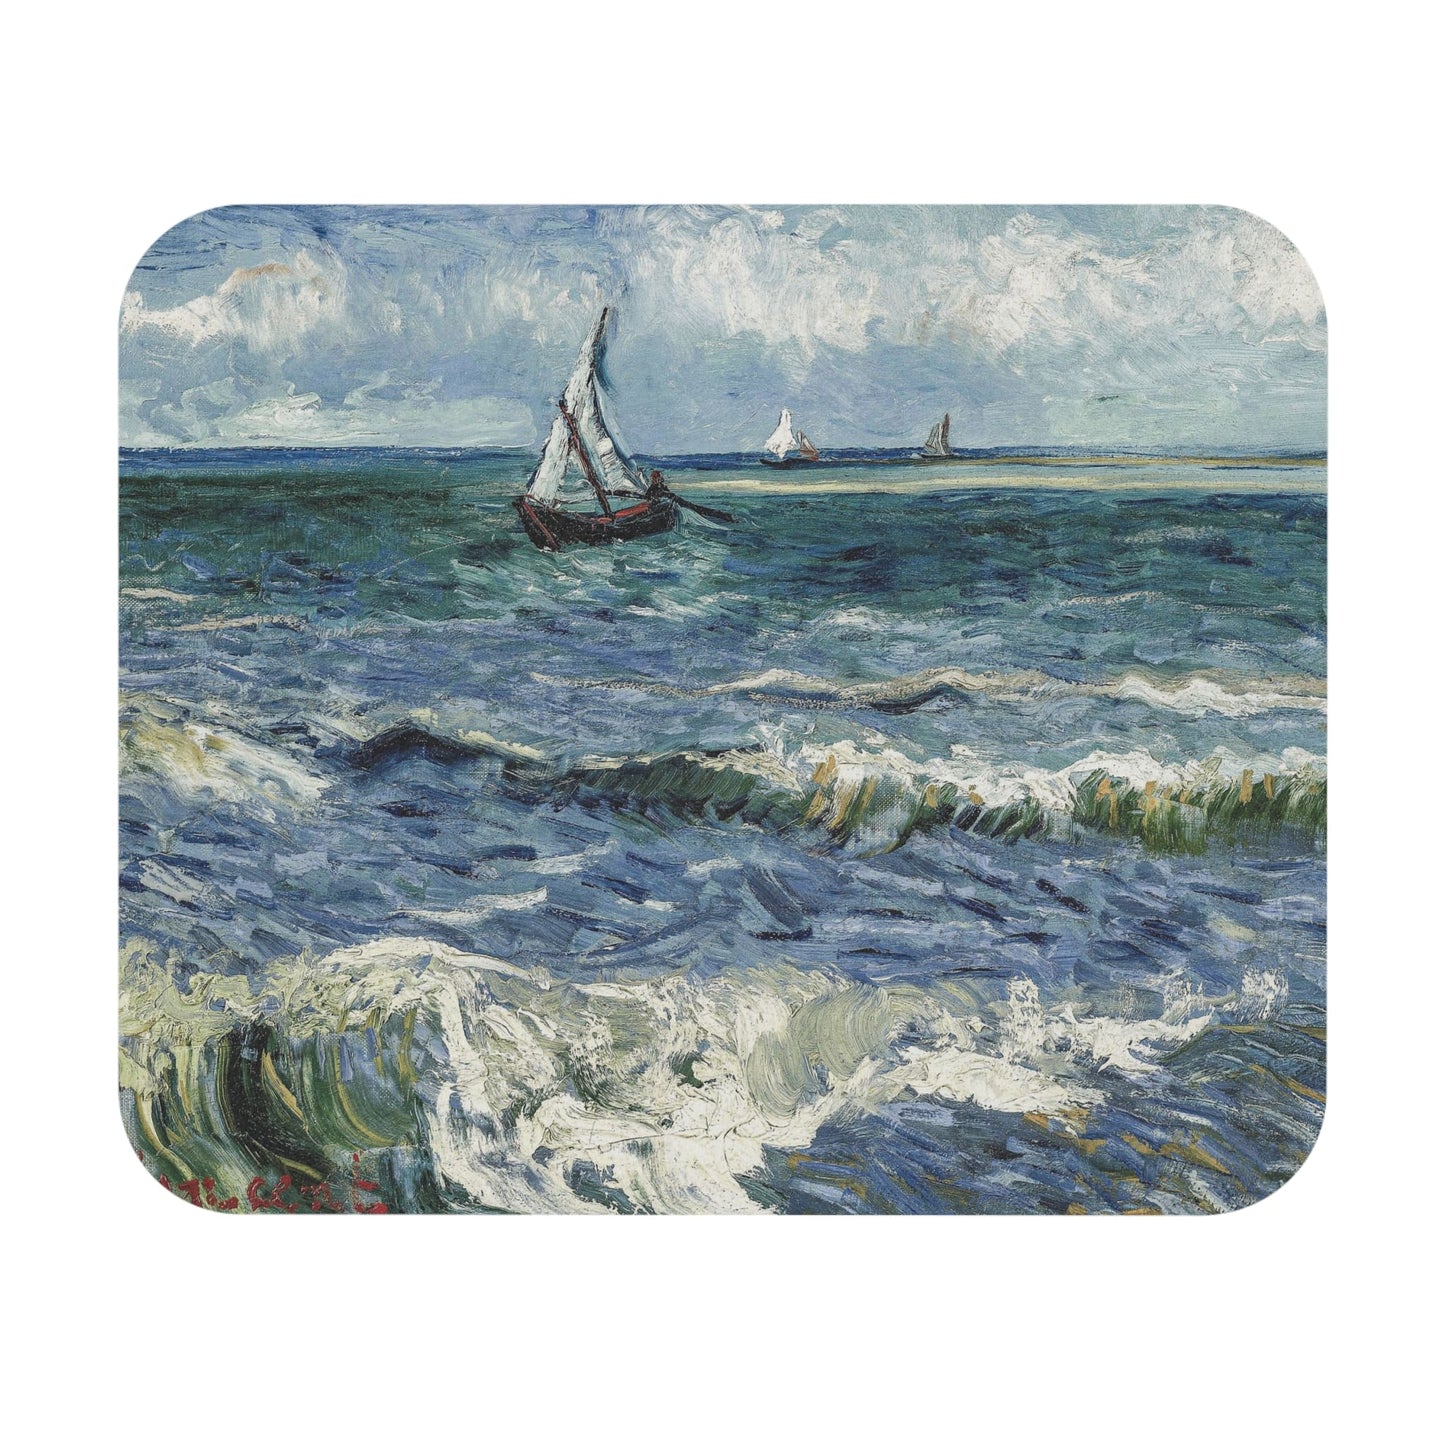 Ocean Mouse Pad with sailboat art, desk and office decor featuring serene ocean scenes.